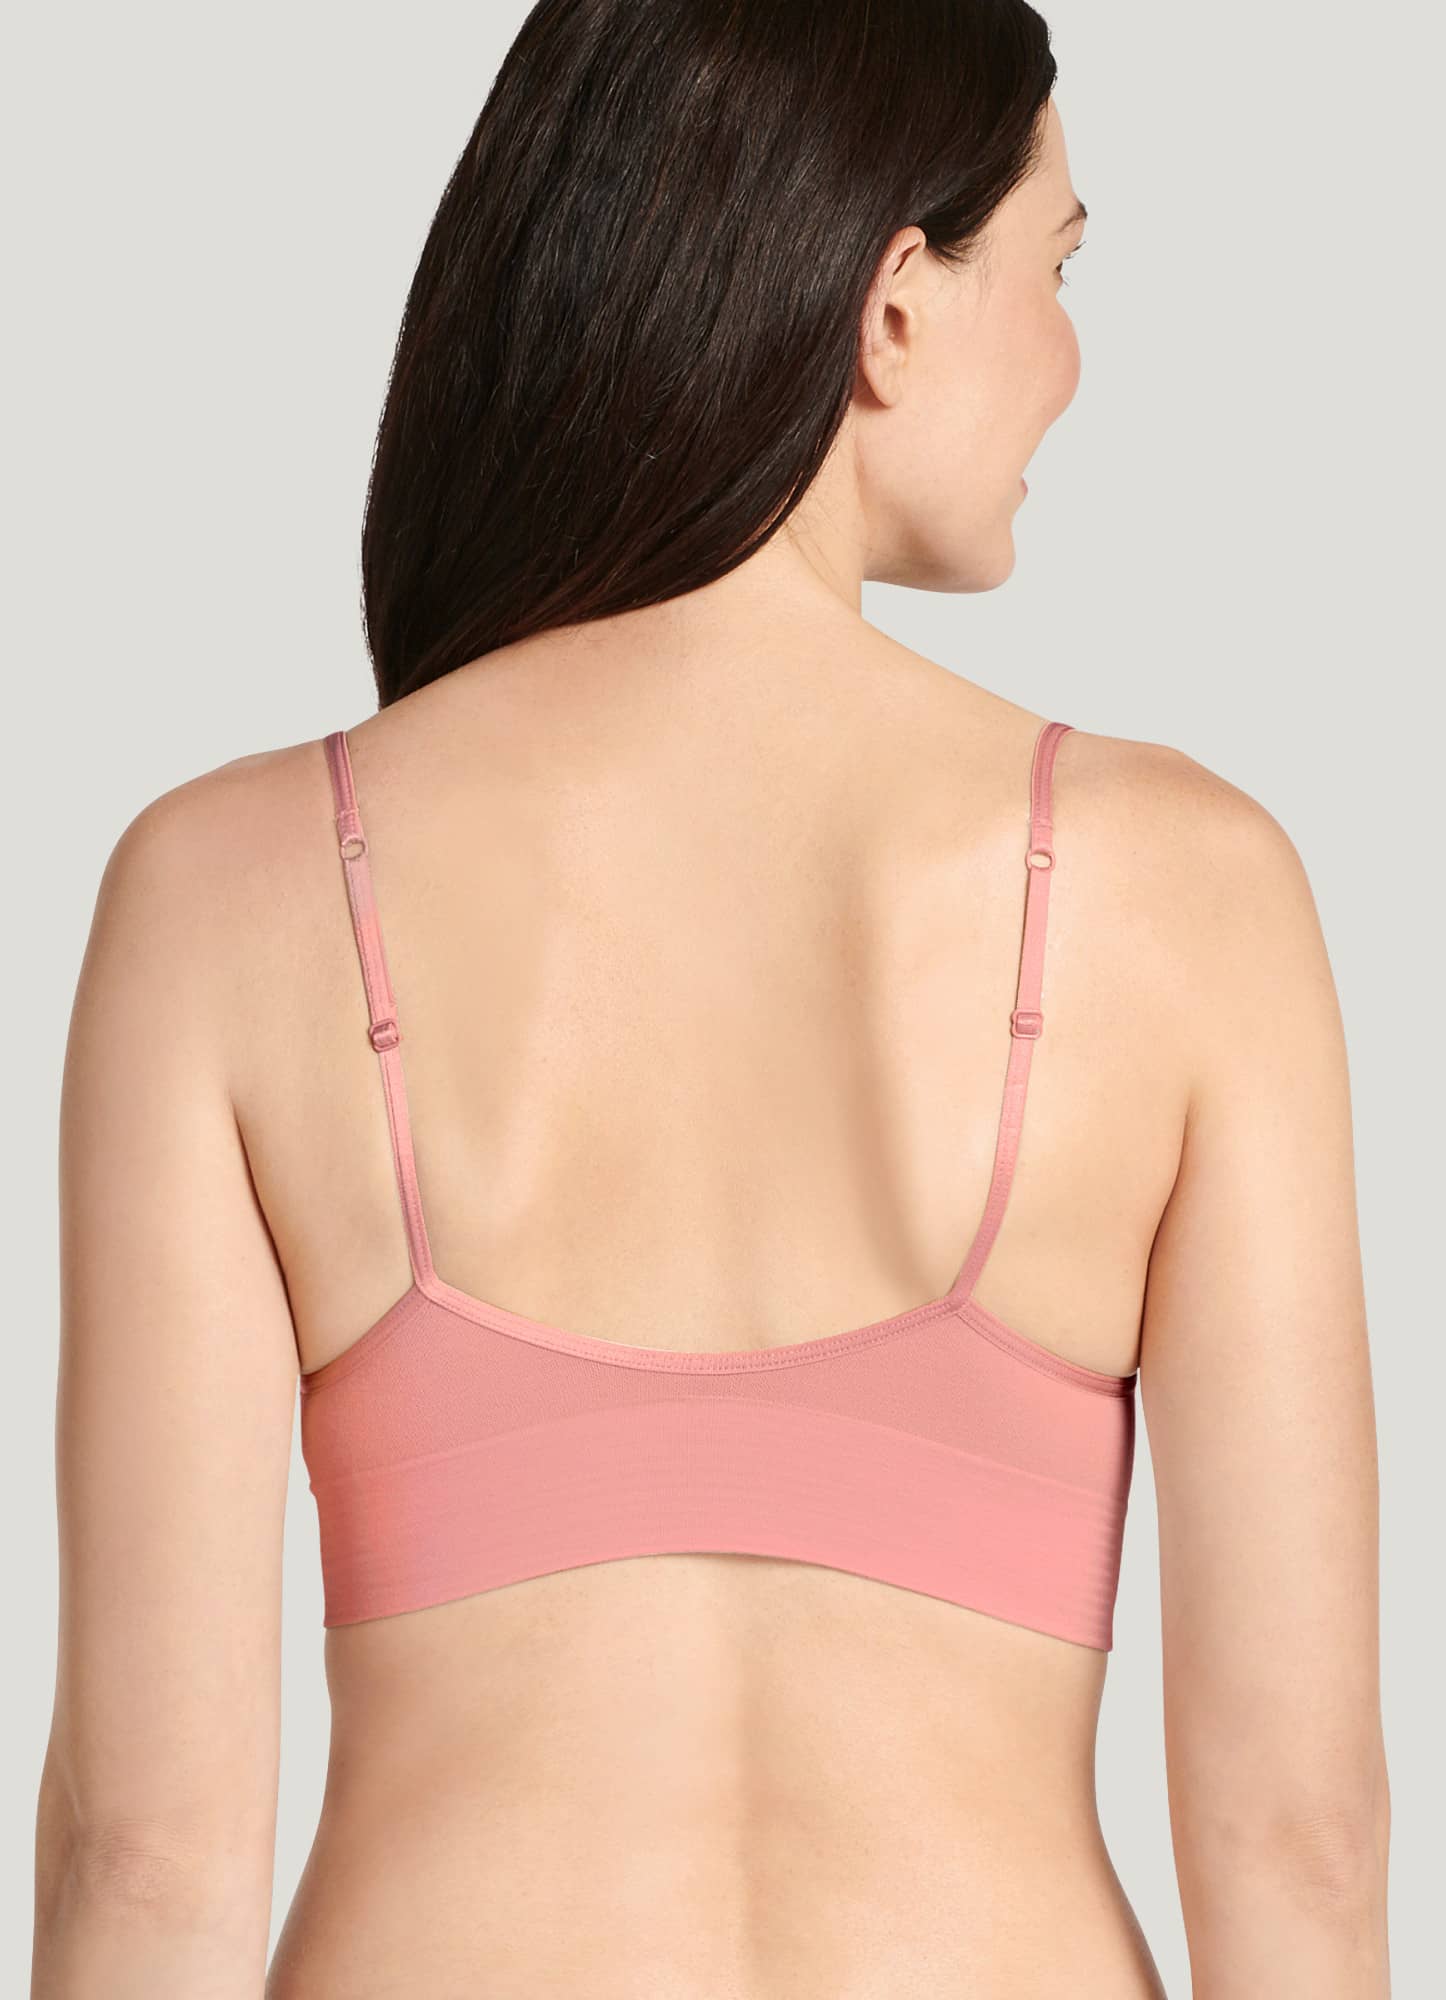 Molded Bras are Great for a Seam-Free Rounded Silhouette